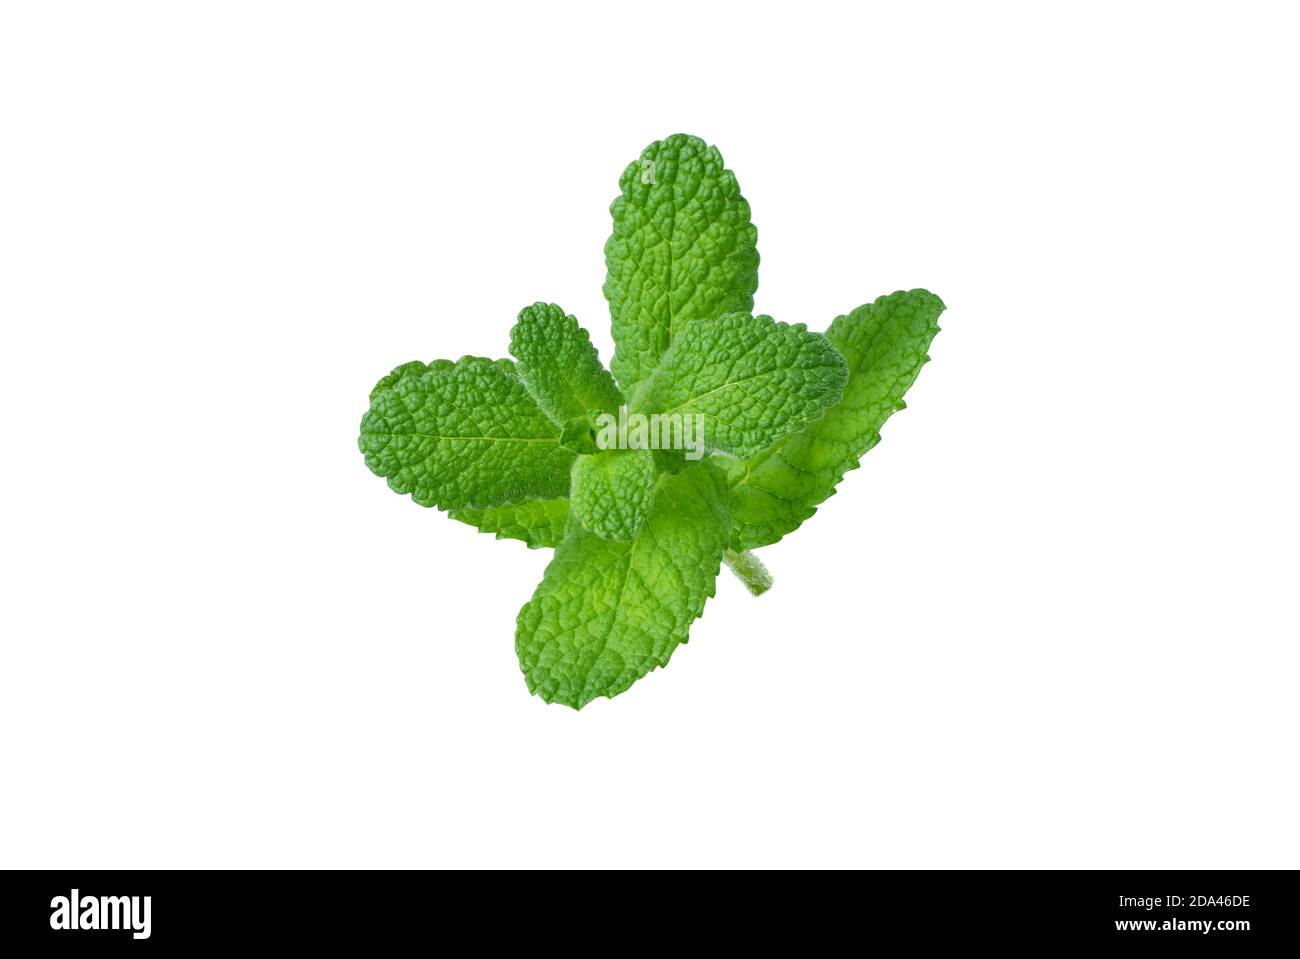 Mint or mentha shoot with leaves isolated on white Stock Photo